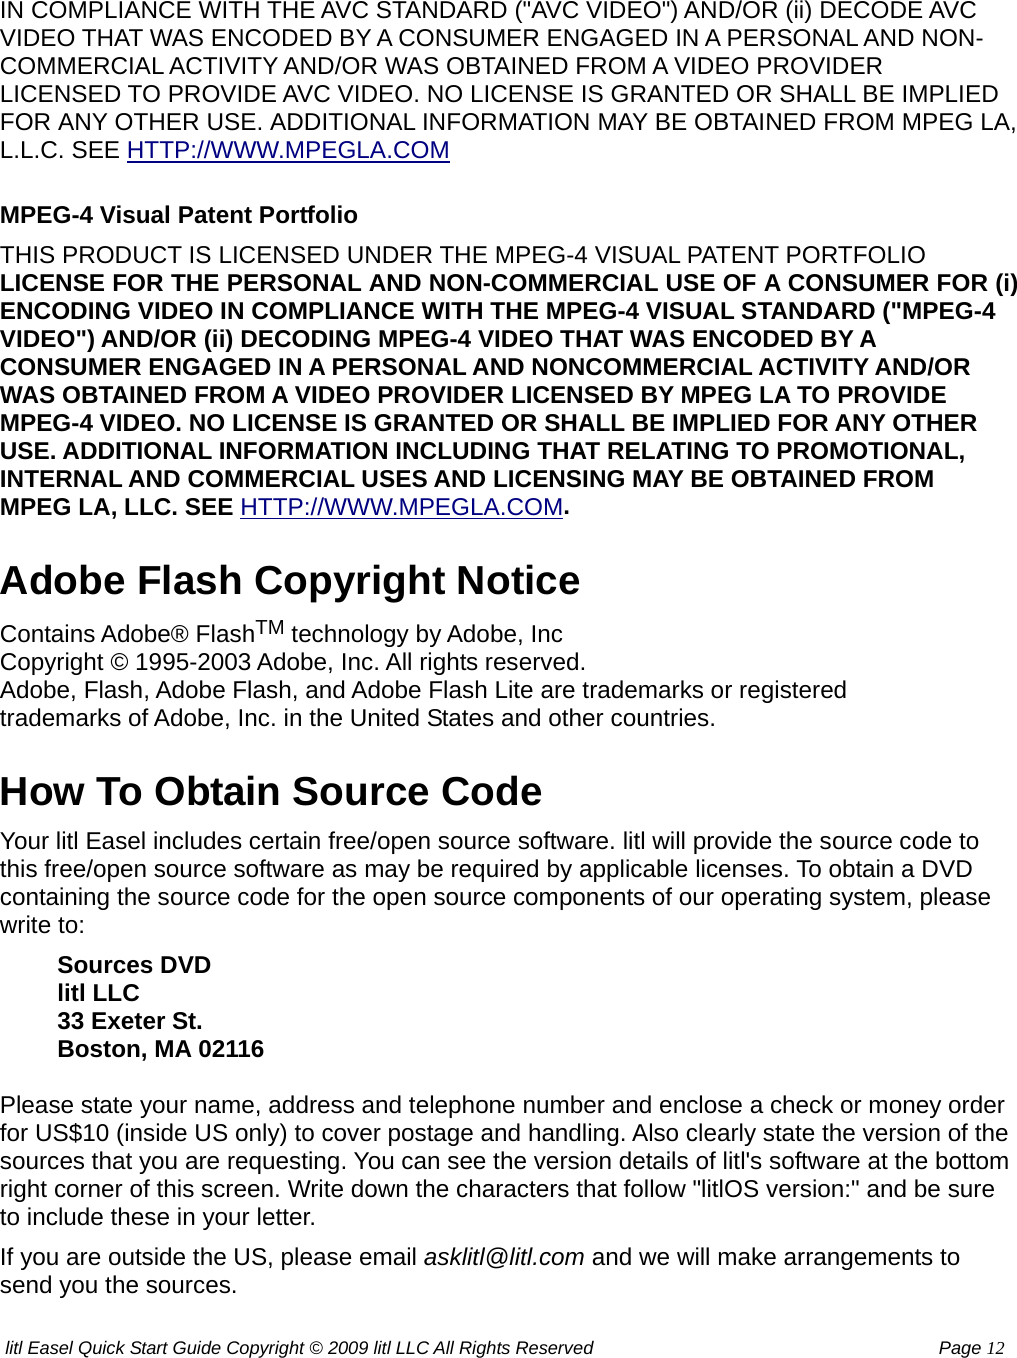 litl Easel Quick Start Guide Copyright © 2009 litl LLC All Rights Reserved          Page 12 IN COMPLIANCE WITH THE AVC STANDARD (&quot;AVC VIDEO&quot;) AND/OR (ii) DECODE AVC VIDEO THAT WAS ENCODED BY A CONSUMER ENGAGED IN A PERSONAL AND NON-COMMERCIAL ACTIVITY AND/OR WAS OBTAINED FROM A VIDEO PROVIDER LICENSED TO PROVIDE AVC VIDEO. NO LICENSE IS GRANTED OR SHALL BE IMPLIED FOR ANY OTHER USE. ADDITIONAL INFORMATION MAY BE OBTAINED FROM MPEG LA, L.L.C. SEE HTTP://WWW.MPEGLA.COM MPEG-4 Visual Patent Portfolio THIS PRODUCT IS LICENSED UNDER THE MPEG-4 VISUAL PATENT PORTFOLIO LICENSE FOR THE PERSONAL AND NON-COMMERCIAL USE OF A CONSUMER FOR (i) ENCODING VIDEO IN COMPLIANCE WITH THE MPEG-4 VISUAL STANDARD (&quot;MPEG-4 VIDEO&quot;) AND/OR (ii) DECODING MPEG-4 VIDEO THAT WAS ENCODED BY A CONSUMER ENGAGED IN A PERSONAL AND NONCOMMERCIAL ACTIVITY AND/OR WAS OBTAINED FROM A VIDEO PROVIDER LICENSED BY MPEG LA TO PROVIDE MPEG-4 VIDEO. NO LICENSE IS GRANTED OR SHALL BE IMPLIED FOR ANY OTHER USE. ADDITIONAL INFORMATION INCLUDING THAT RELATING TO PROMOTIONAL, INTERNAL AND COMMERCIAL USES AND LICENSING MAY BE OBTAINED FROM MPEG LA, LLC. SEE HTTP://WWW.MPEGLA.COM. Adobe Flash Copyright Notice Contains Adobe® FlashTM technology by Adobe, Inc  Copyright © 1995-2003 Adobe, Inc. All rights reserved.   Adobe, Flash, Adobe Flash, and Adobe Flash Lite are trademarks or registered   trademarks of Adobe, Inc. in the United States and other countries.   How To Obtain Source Code Your litl Easel includes certain free/open source software. litl will provide the source code to this free/open source software as may be required by applicable licenses. To obtain a DVD containing the source code for the open source components of our operating system, please write to: Sources DVD   litl LLC   33 Exeter St.   Boston, MA 02116   Please state your name, address and telephone number and enclose a check or money order for US$10 (inside US only) to cover postage and handling. Also clearly state the version of the sources that you are requesting. You can see the version details of litl&apos;s software at the bottom right corner of this screen. Write down the characters that follow &quot;litlOS version:&quot; and be sure to include these in your letter. If you are outside the US, please email asklitl@litl.com and we will make arrangements to send you the sources. 